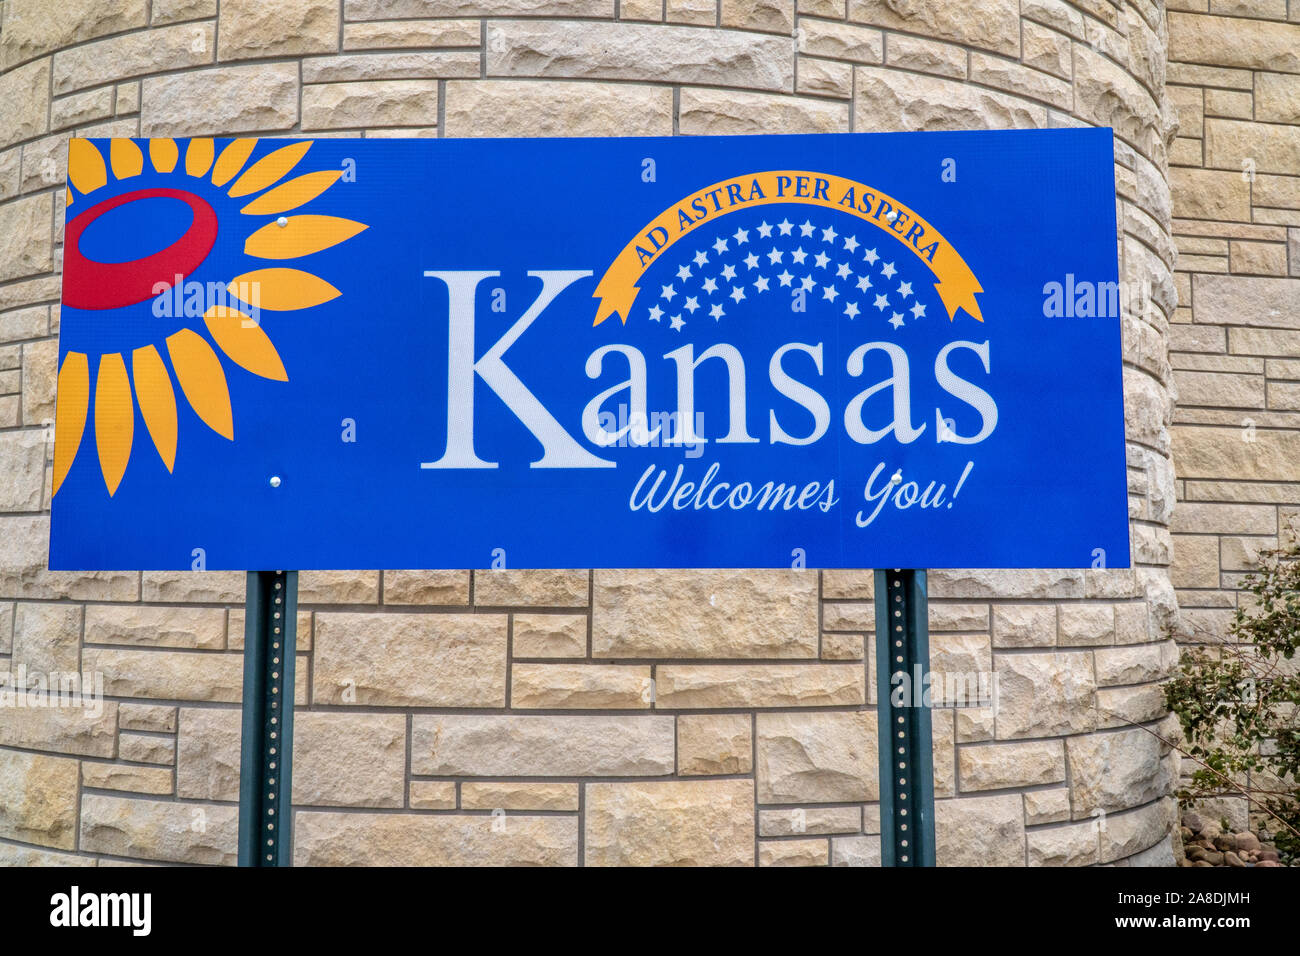 Kansas welcomes you - welcome roadside sign at freeway rest area with a popular Latin phrase ad astra per aspera (through hardships to the stars), dri Stock Photo